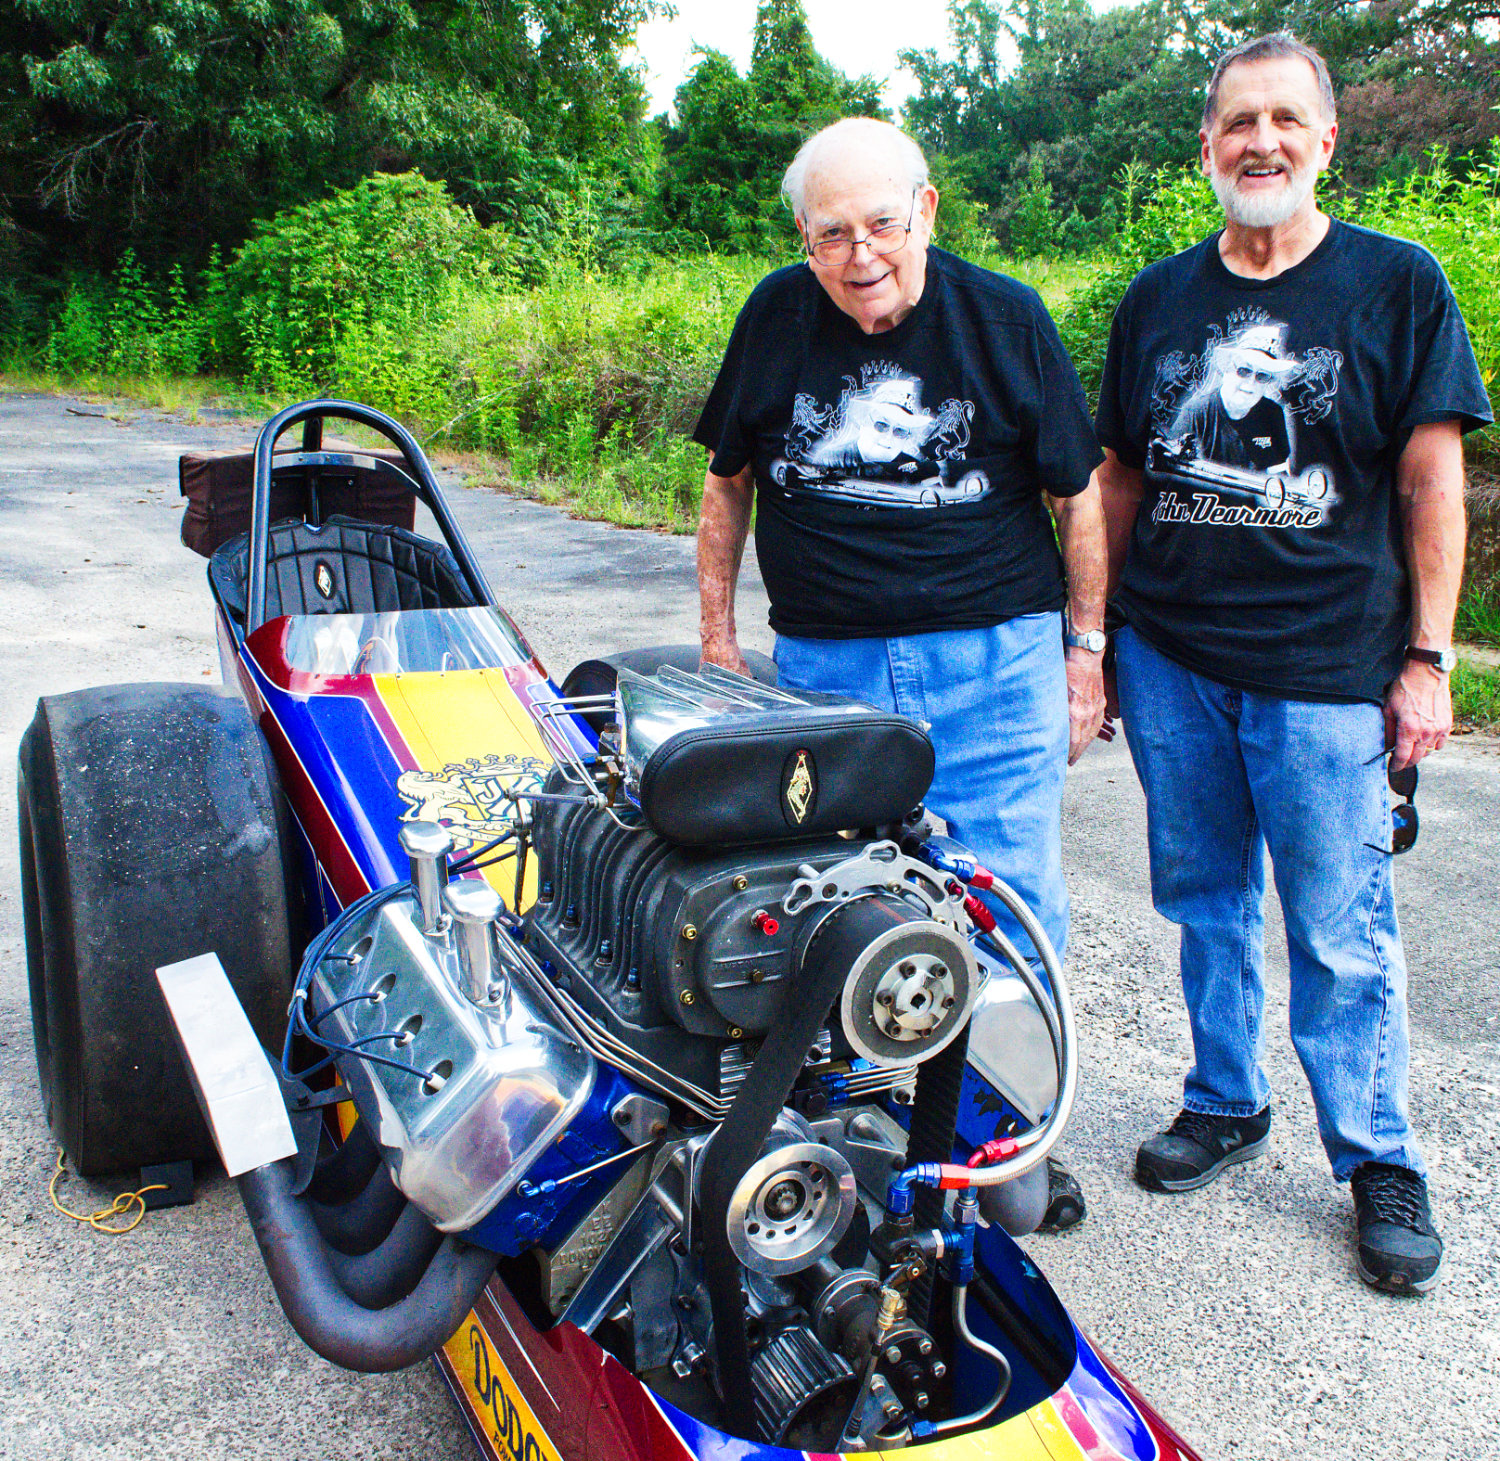 John Dearmore, left, with Keith Redfearn and Dearmore’s restored 1970 top fuel dragster. Dearmore is celebrating 65 years in the racing business with a final tour.